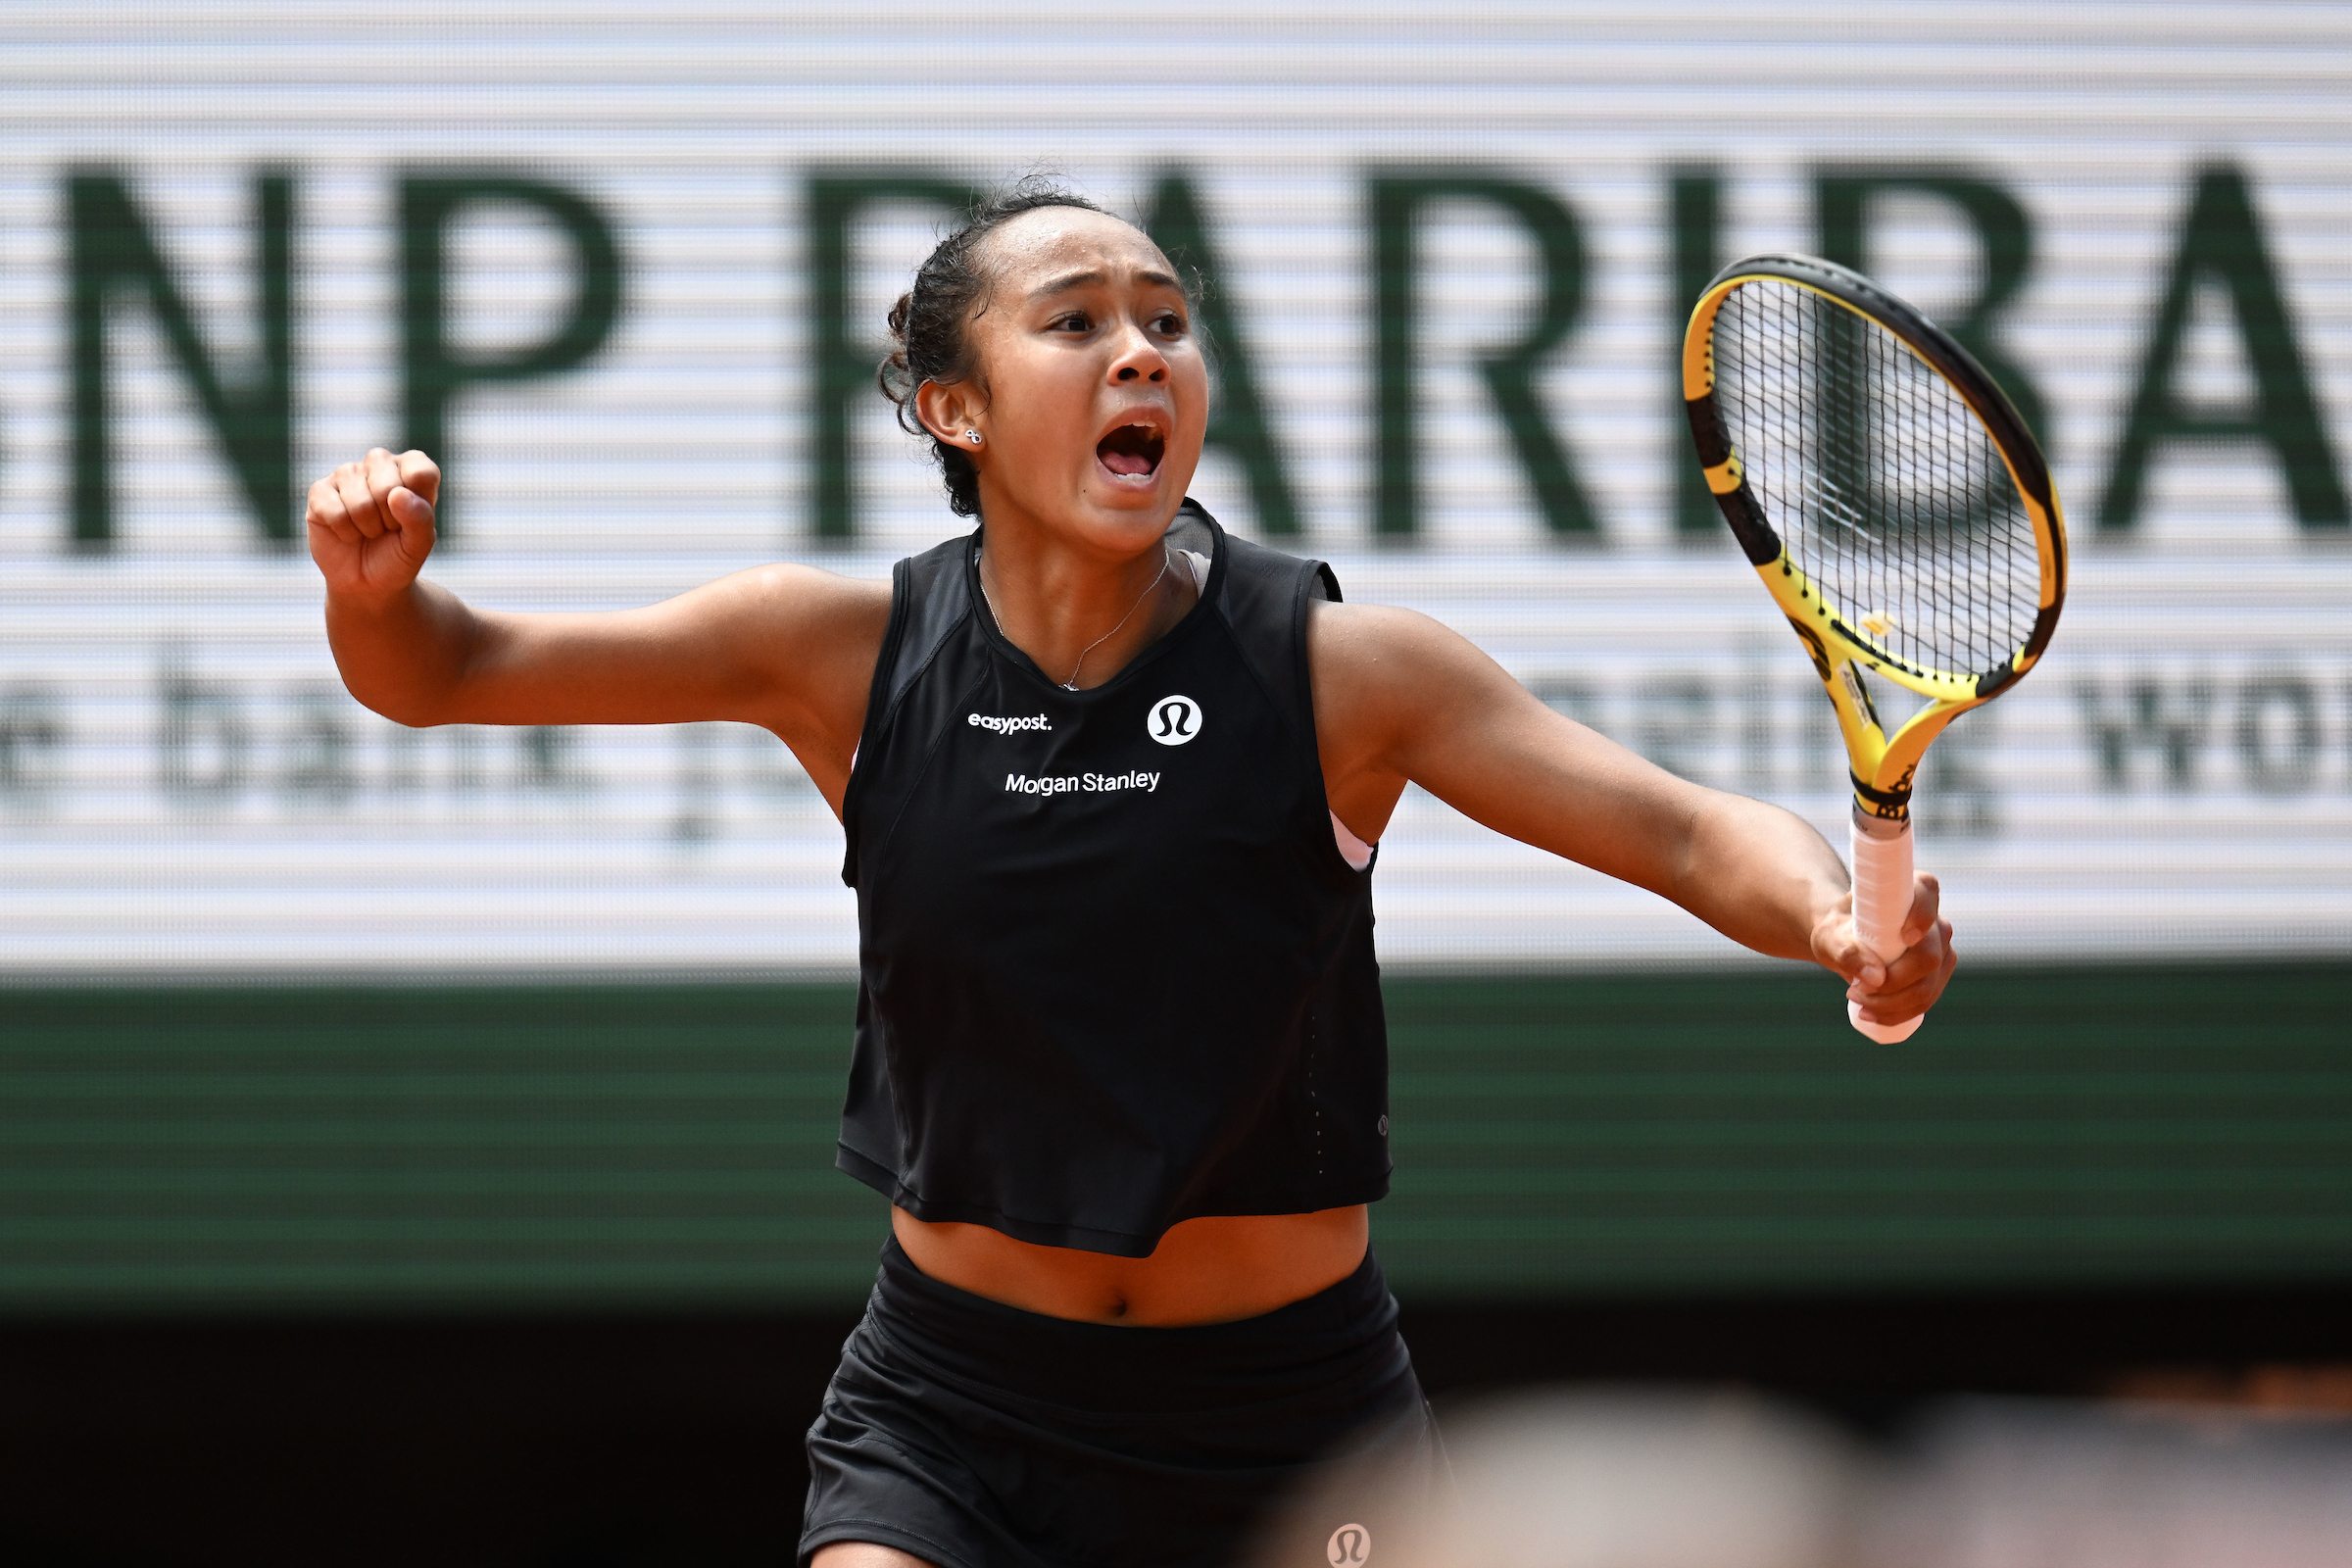 Matches of the Week at Roland Garros 2022 Week 1